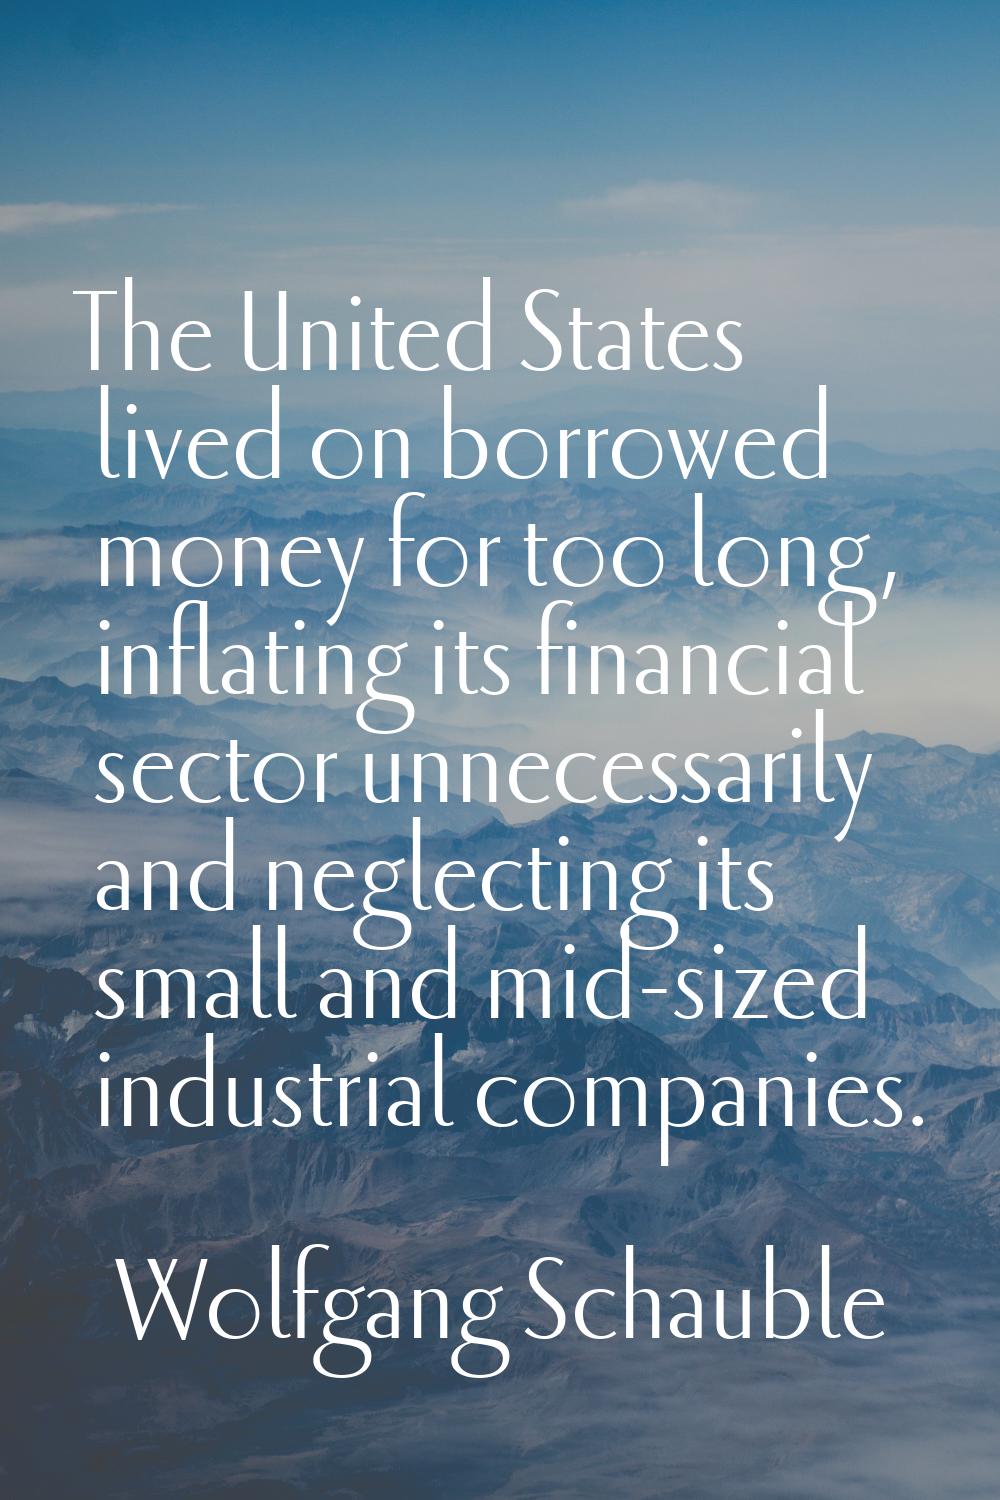 The United States lived on borrowed money for too long, inflating its financial sector unnecessaril